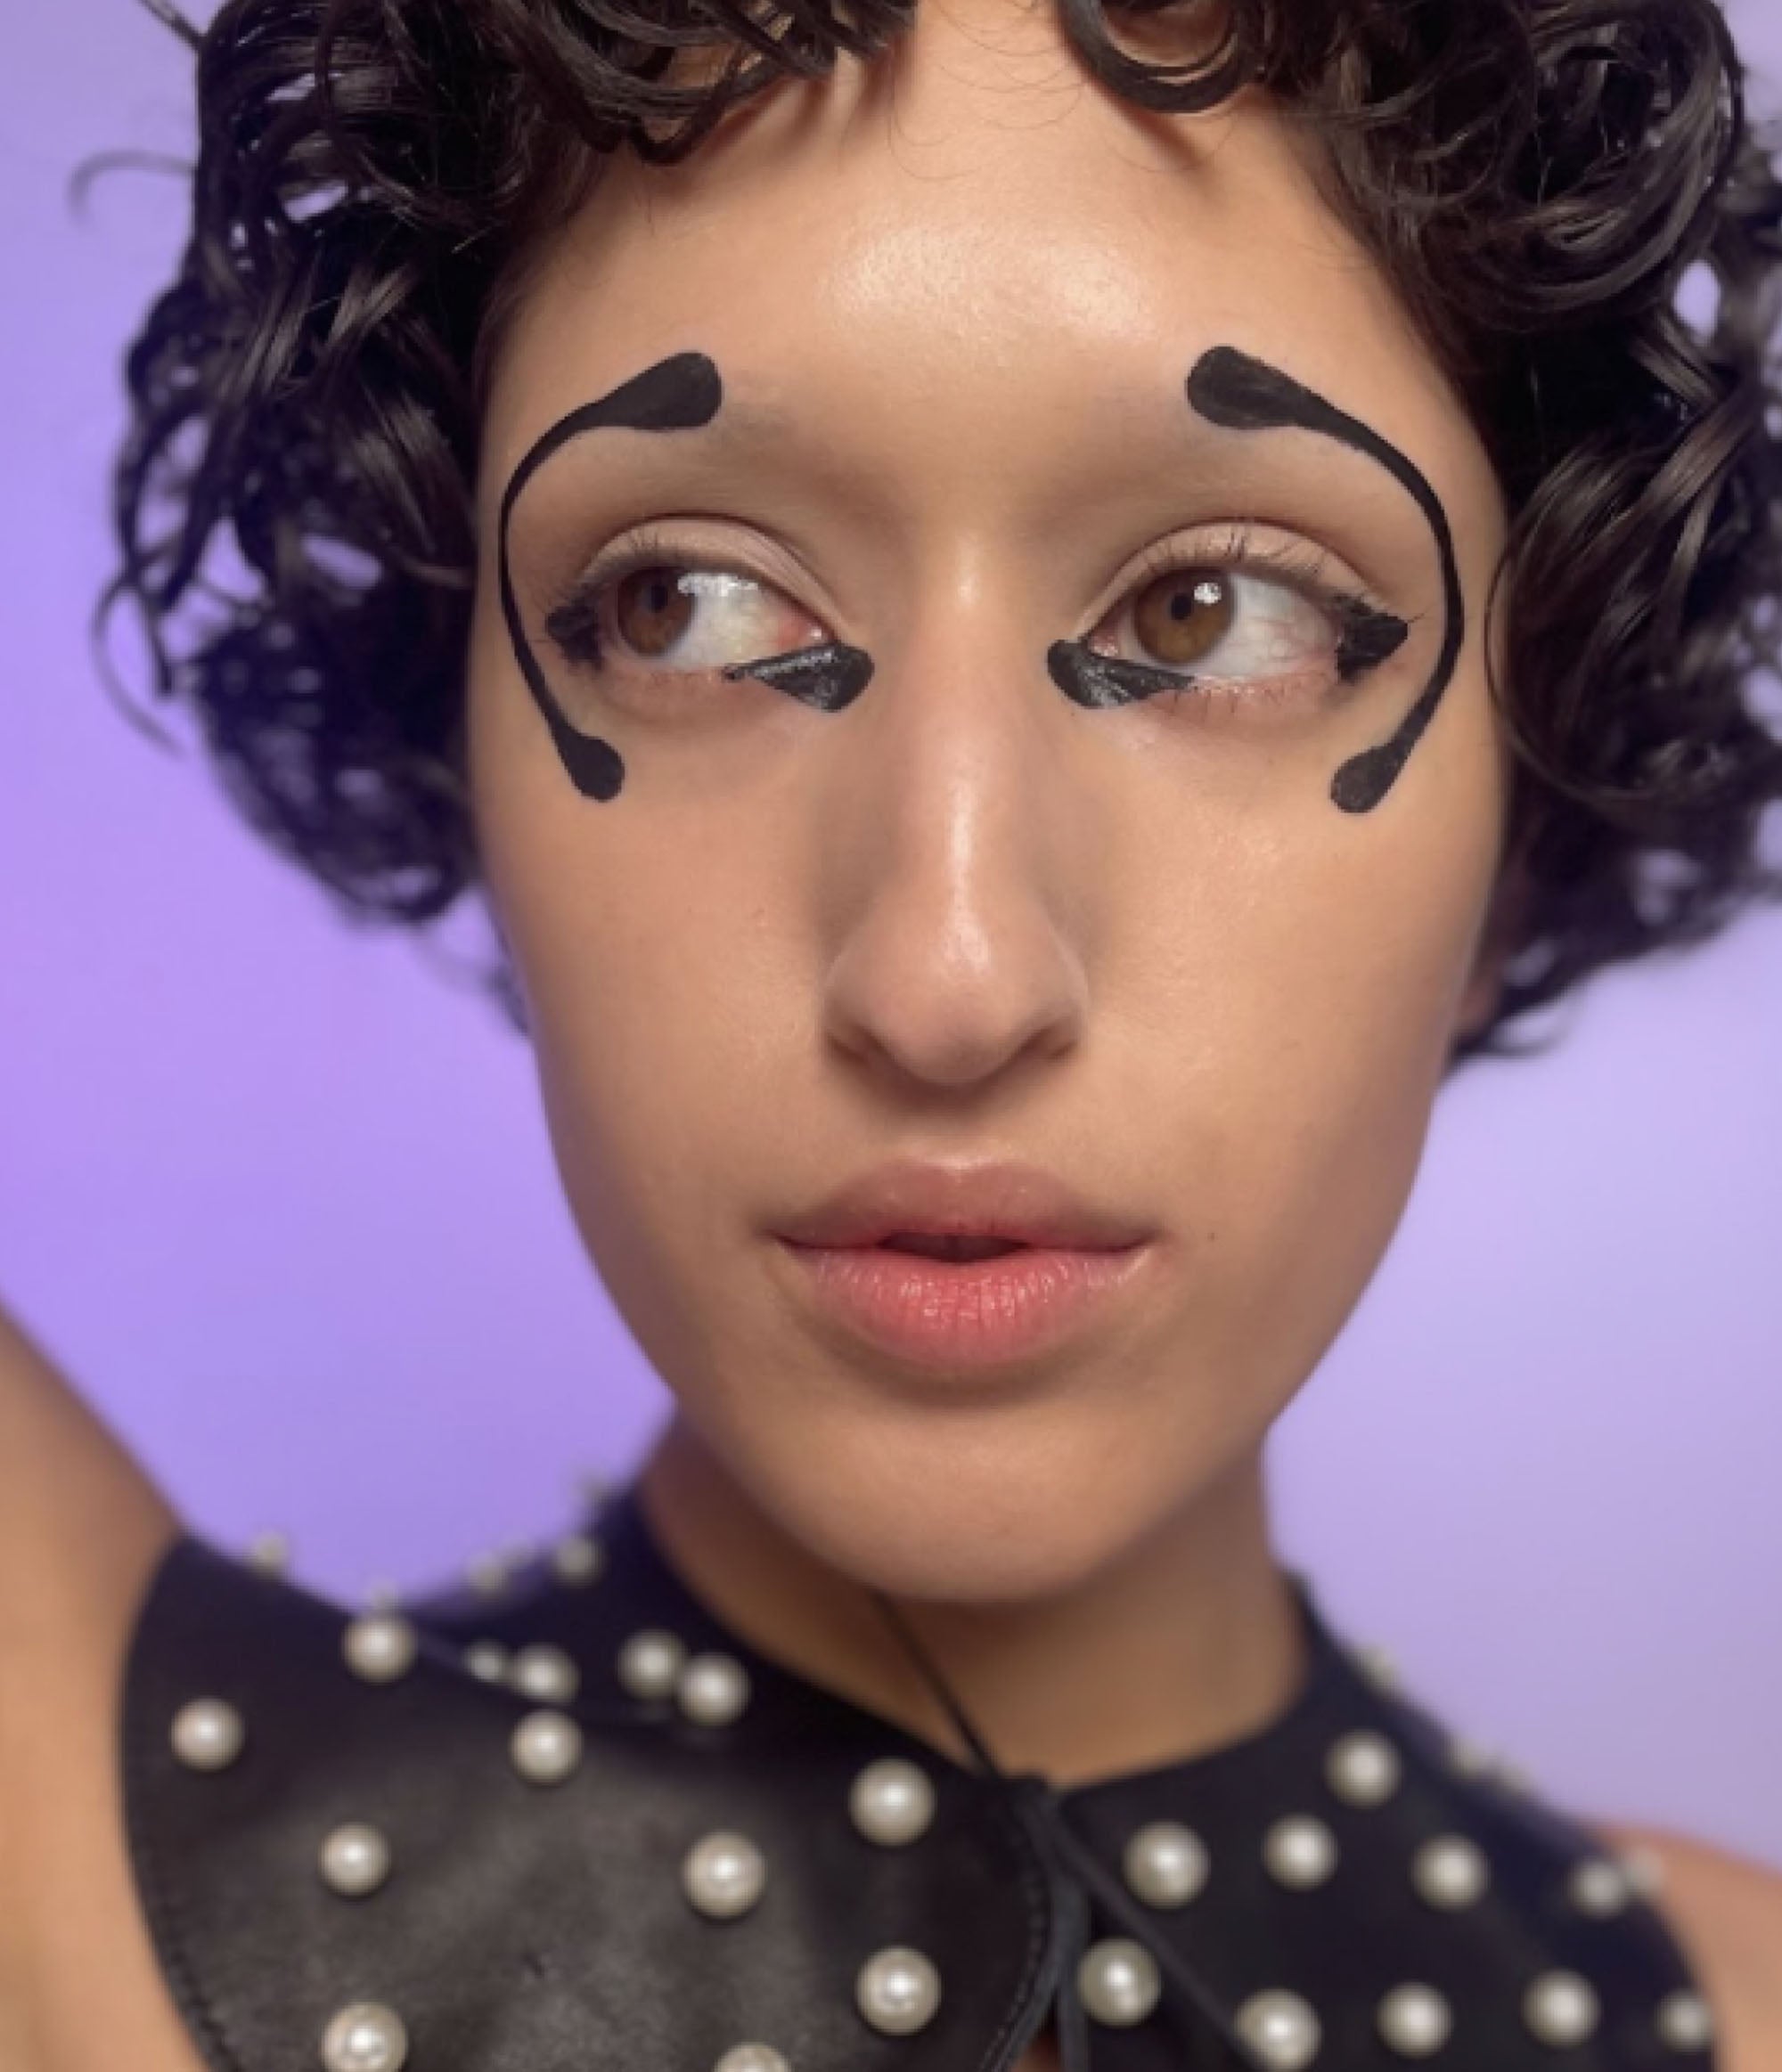 A headshot of a girl with no eyebrows and short brown curly hair wearing a humanoid makeup look. The look consits of a half circle on the outside of each eye that sweeps from the eyebrow to the cheekbone, and black geometric shapes in the corner of each eye